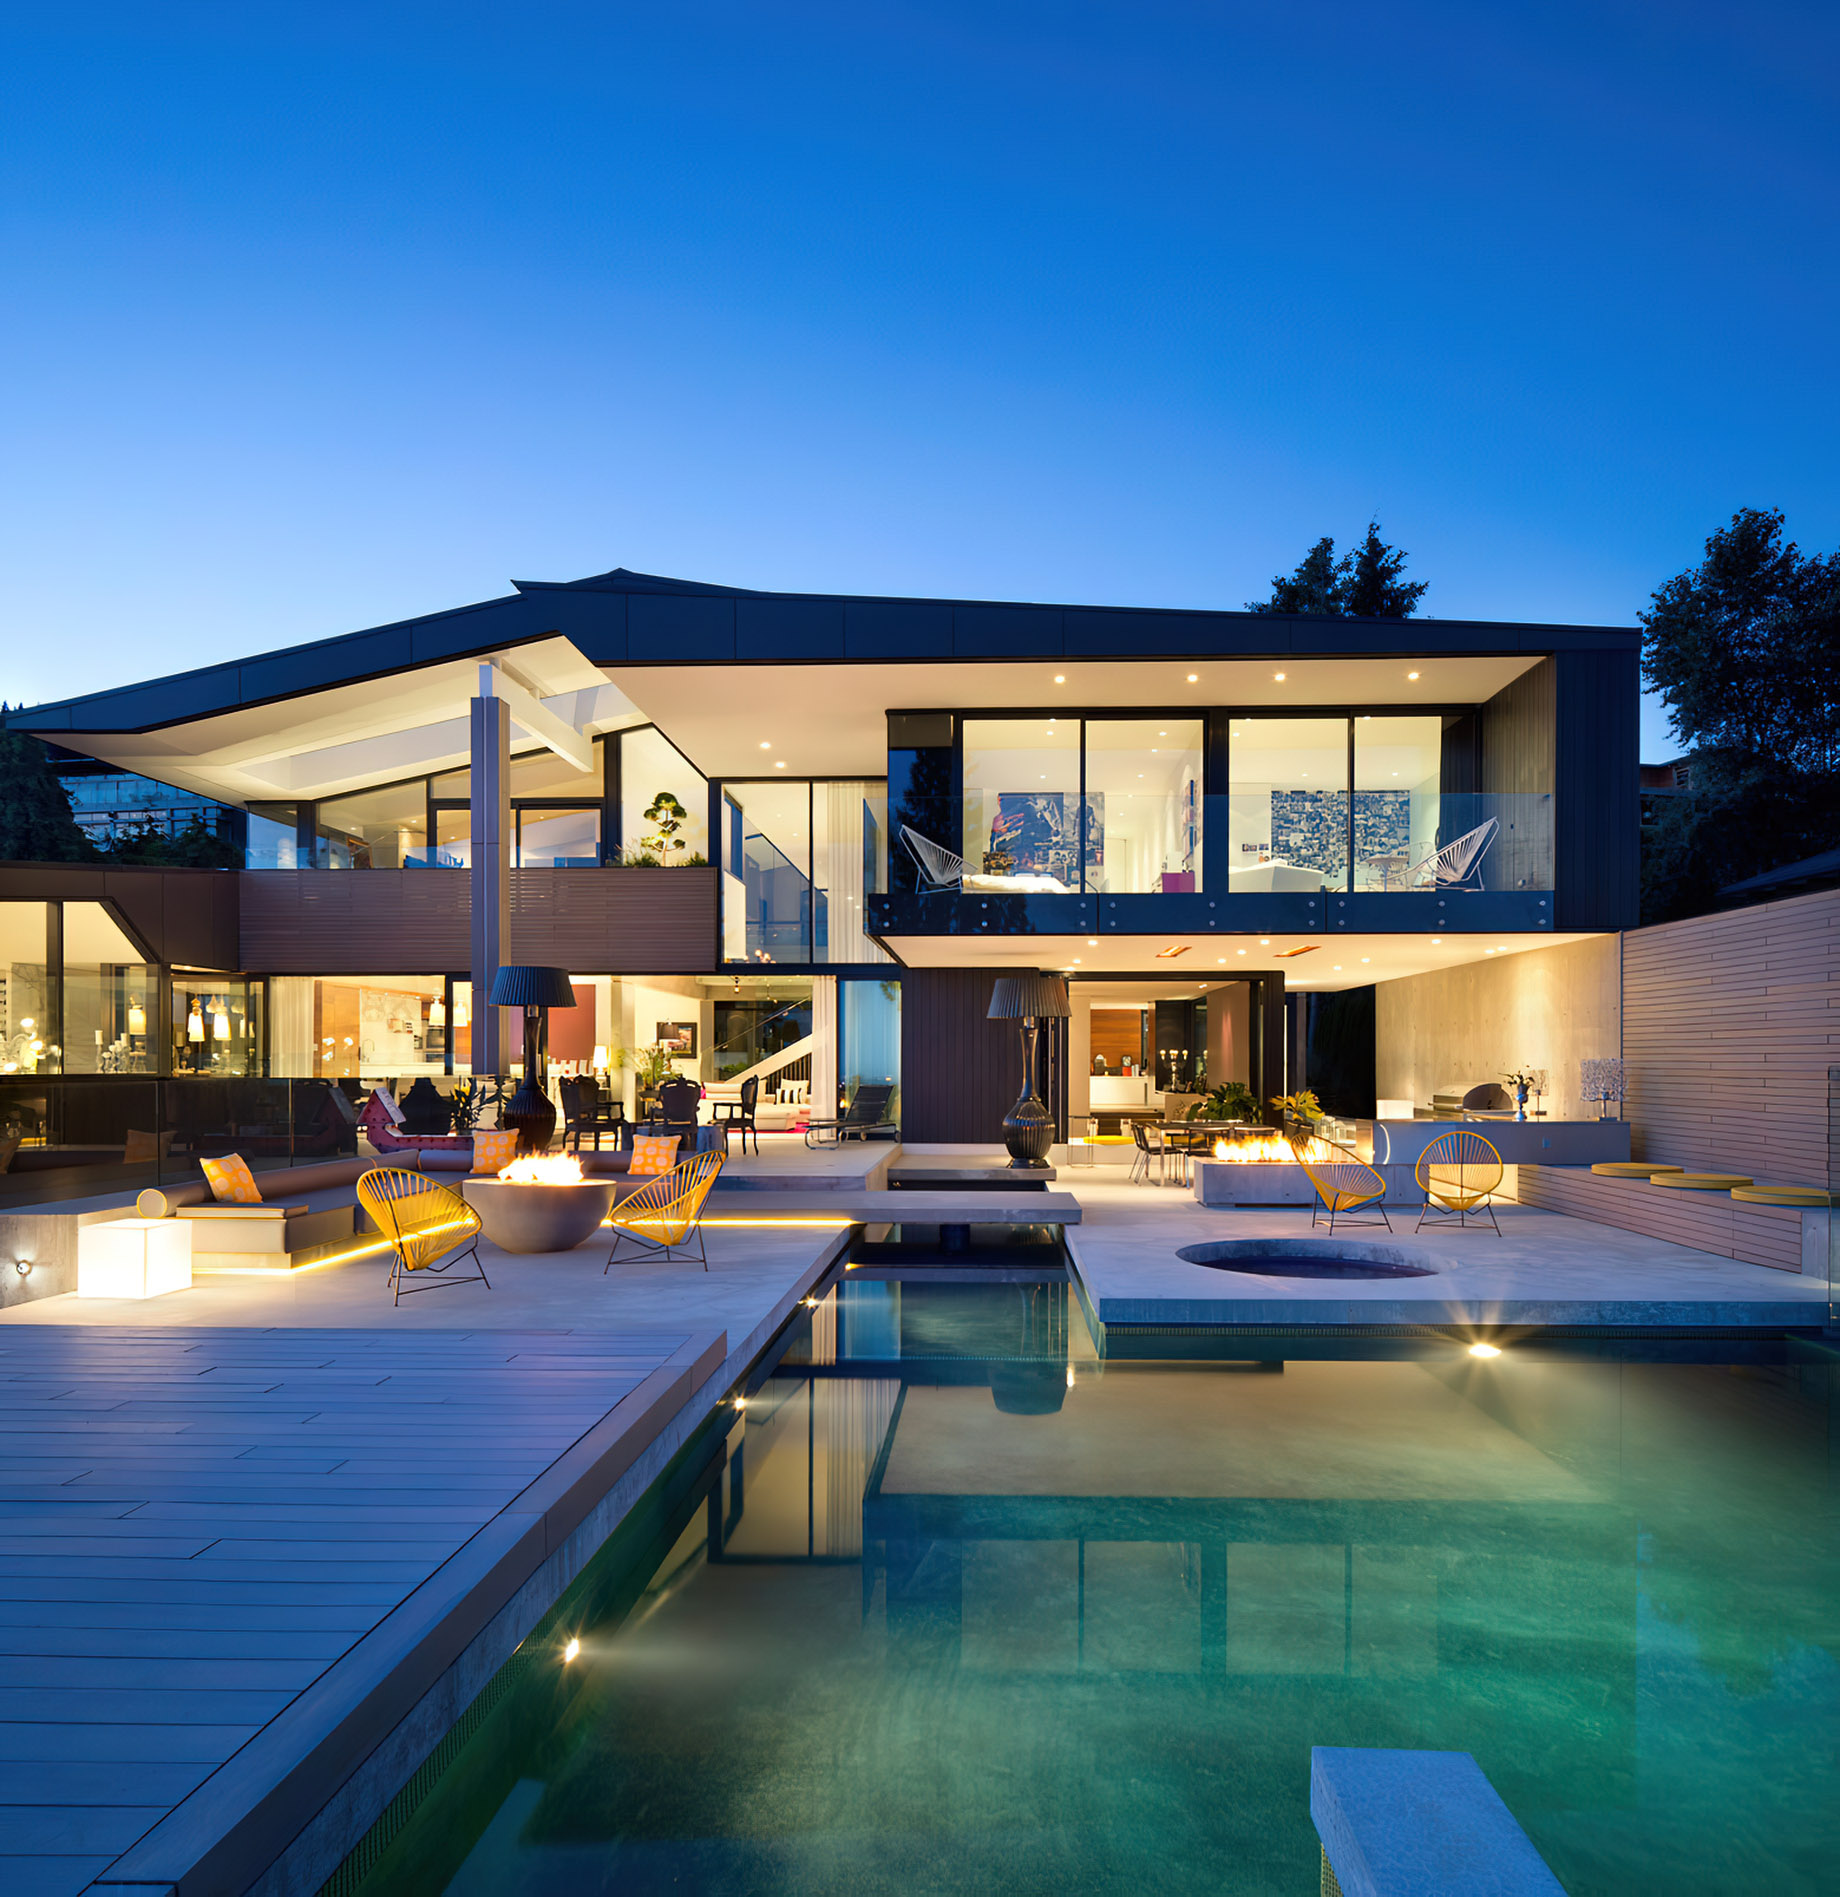 Groveland Road House Luxury Modern – West Vancouver, BC, Canada